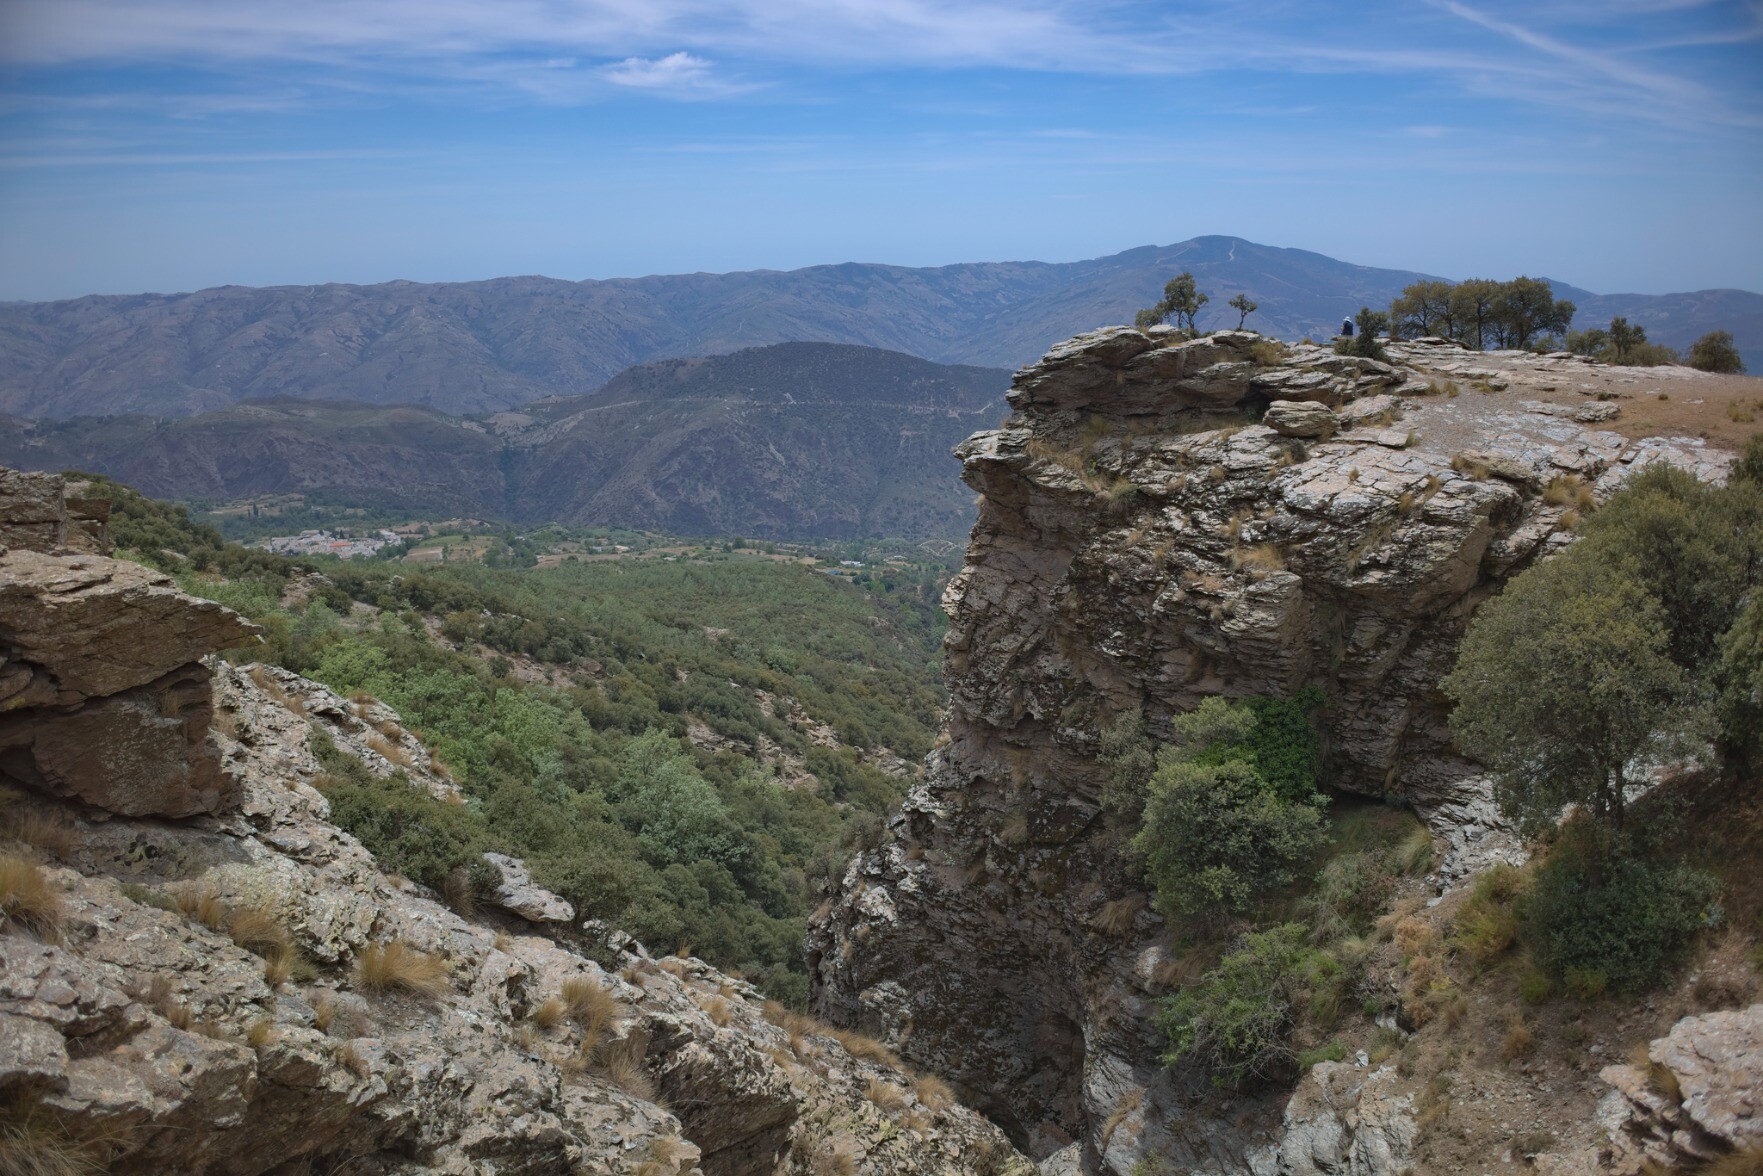 In the foreground is a rocky gorge, the right hand rocks have trees on top. In the distance are green forests and a range of low mountains